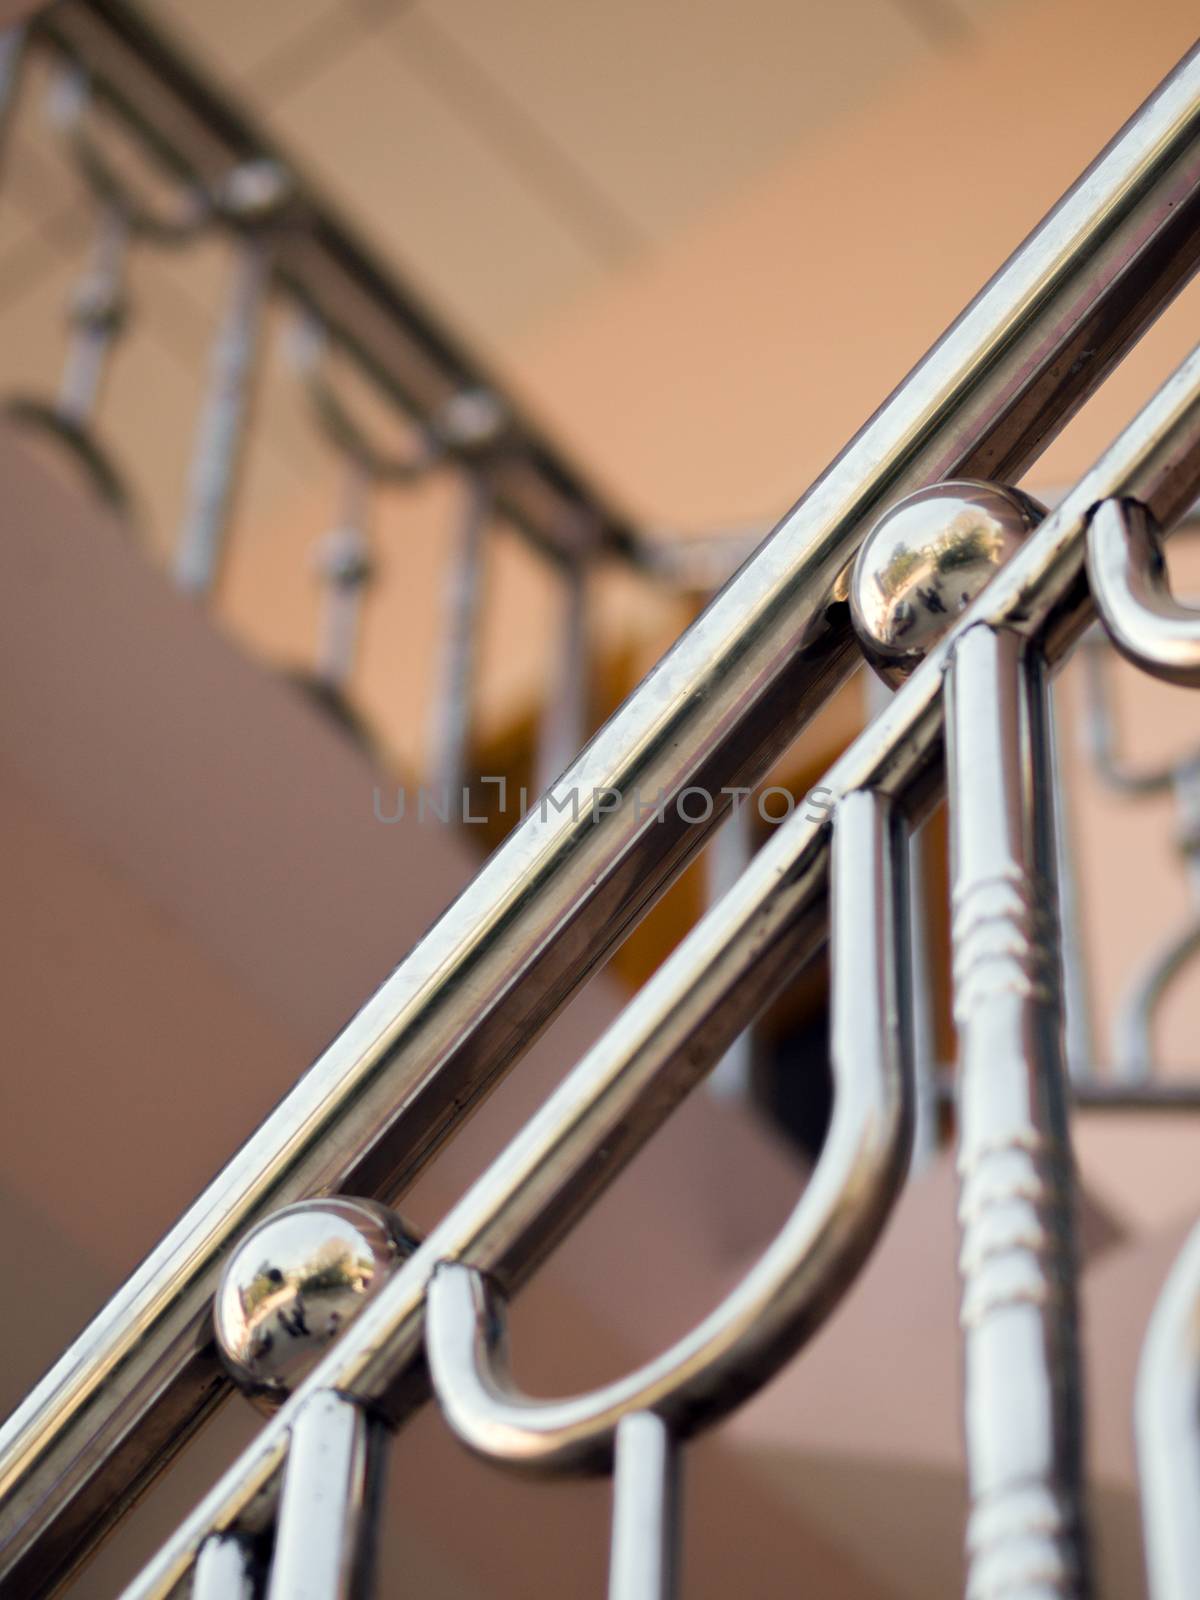 COLOR PHOTO OF HANDRAIL MADE FROM STAINLESS STEEL